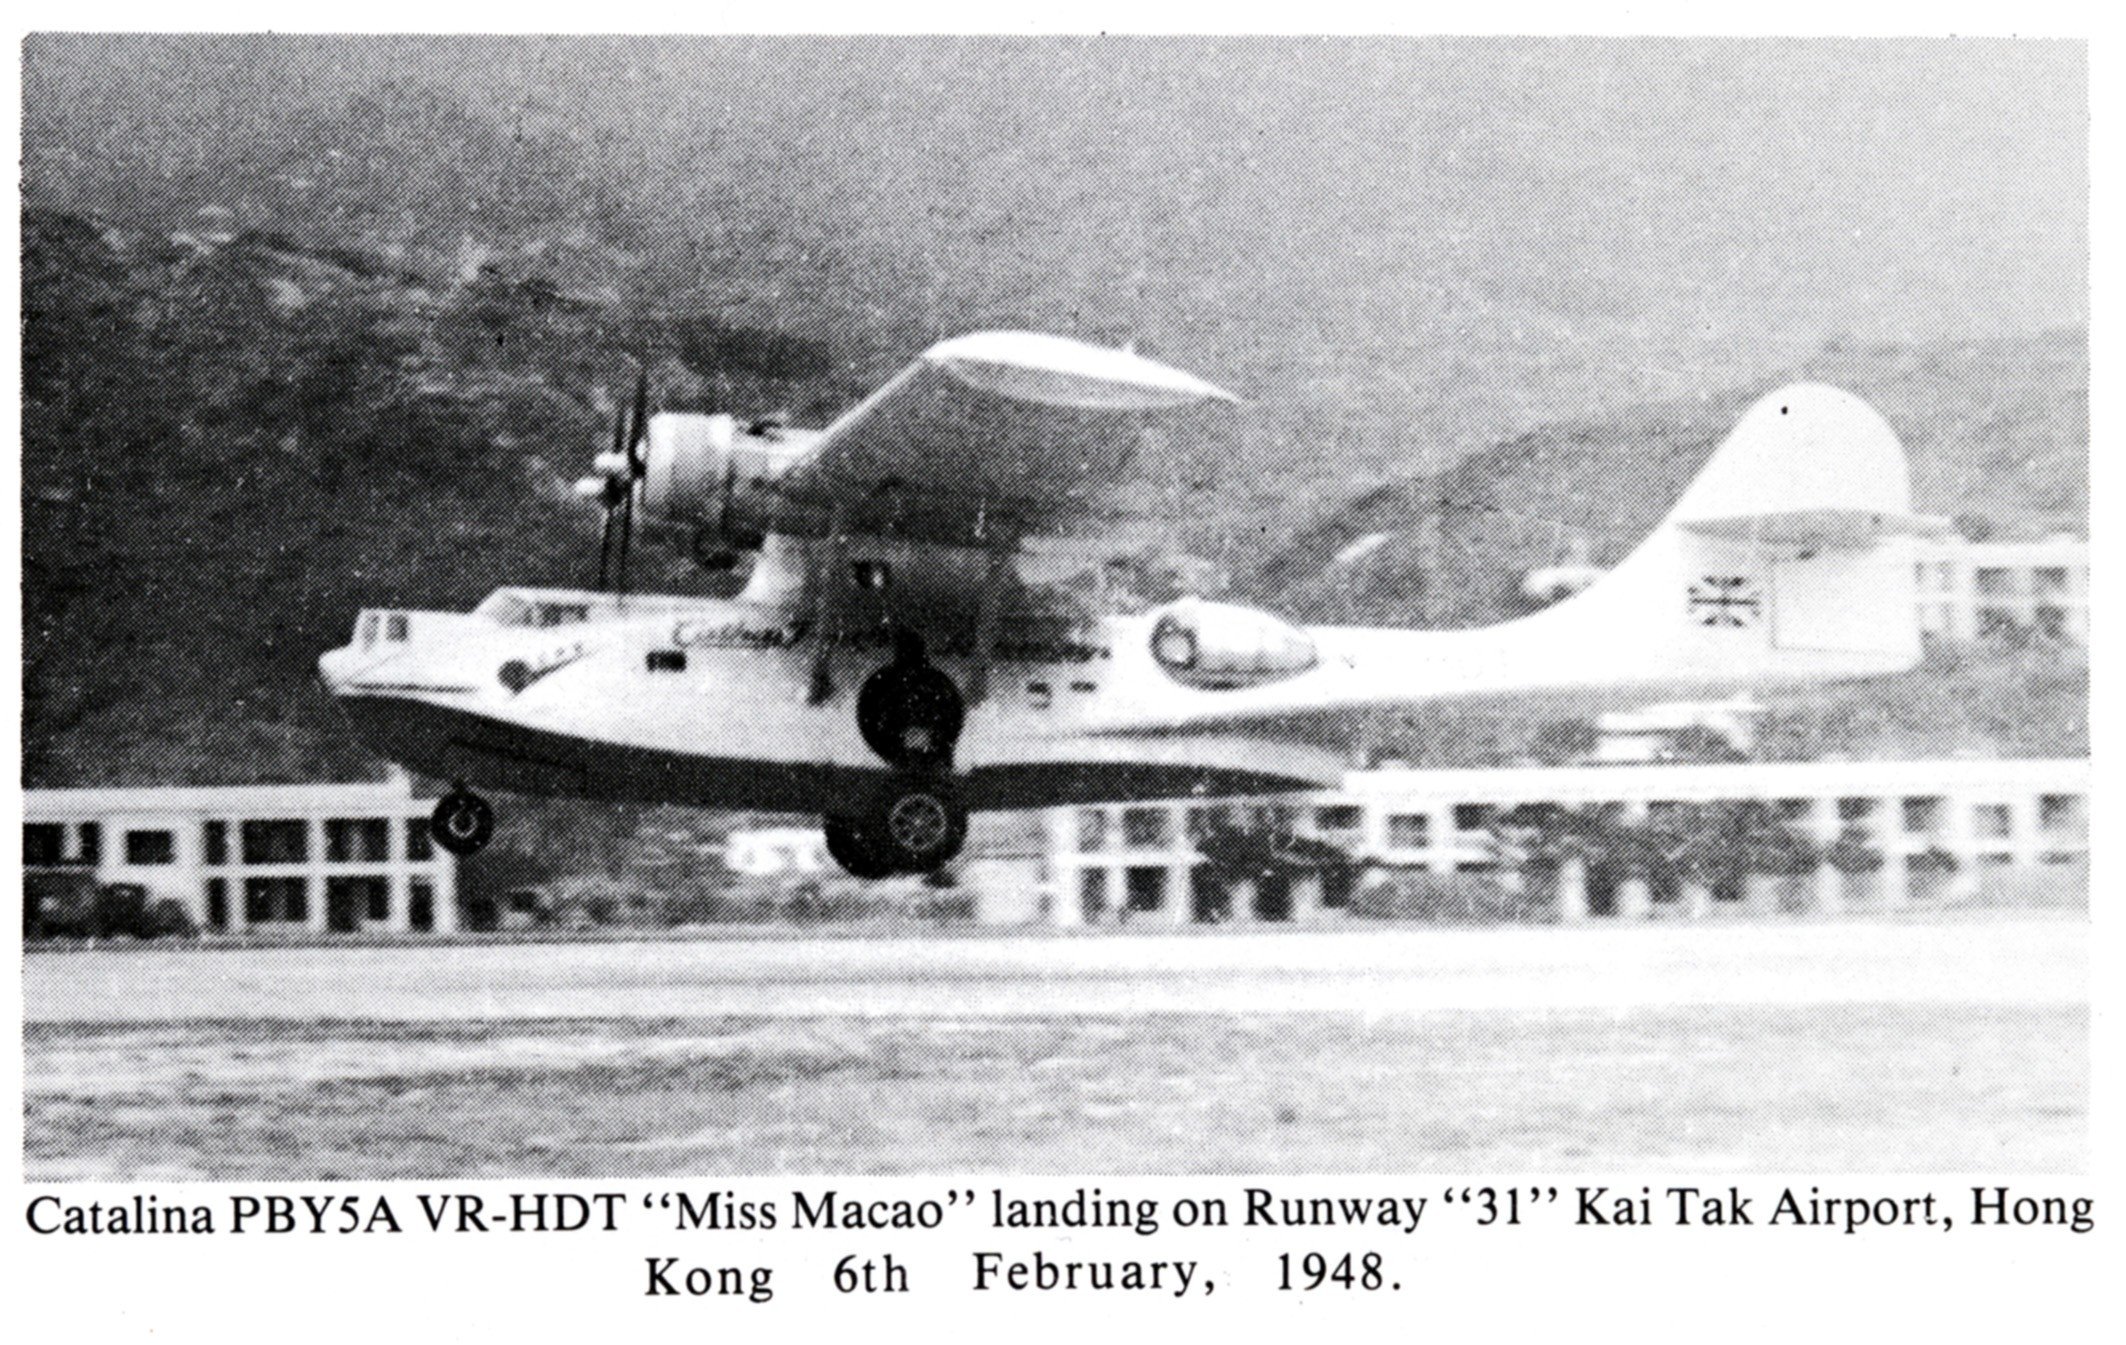 The amphibious Cathay Pacific Airways Catalina plane Miss Macao landing at Kai Tak Airport, in February 1948. Photo: collection of Charles Eather